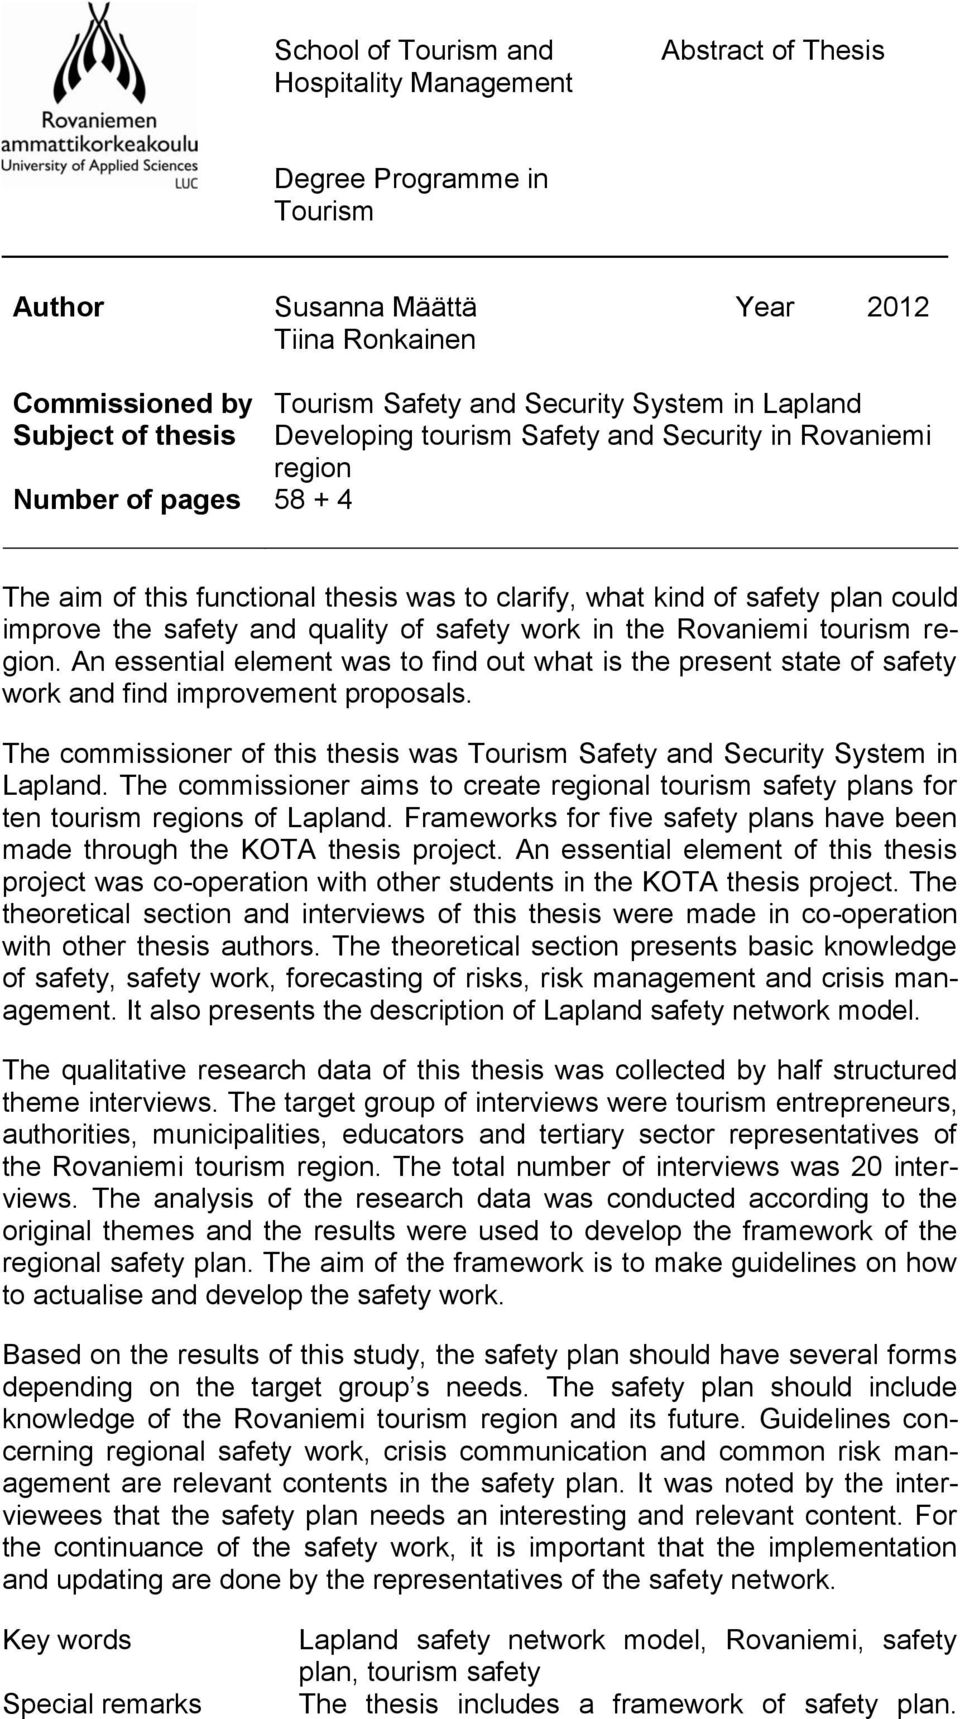 safety and quality of safety work in the Rovaniemi tourism region. An essential element was to find out what is the present state of safety work and find improvement proposals.